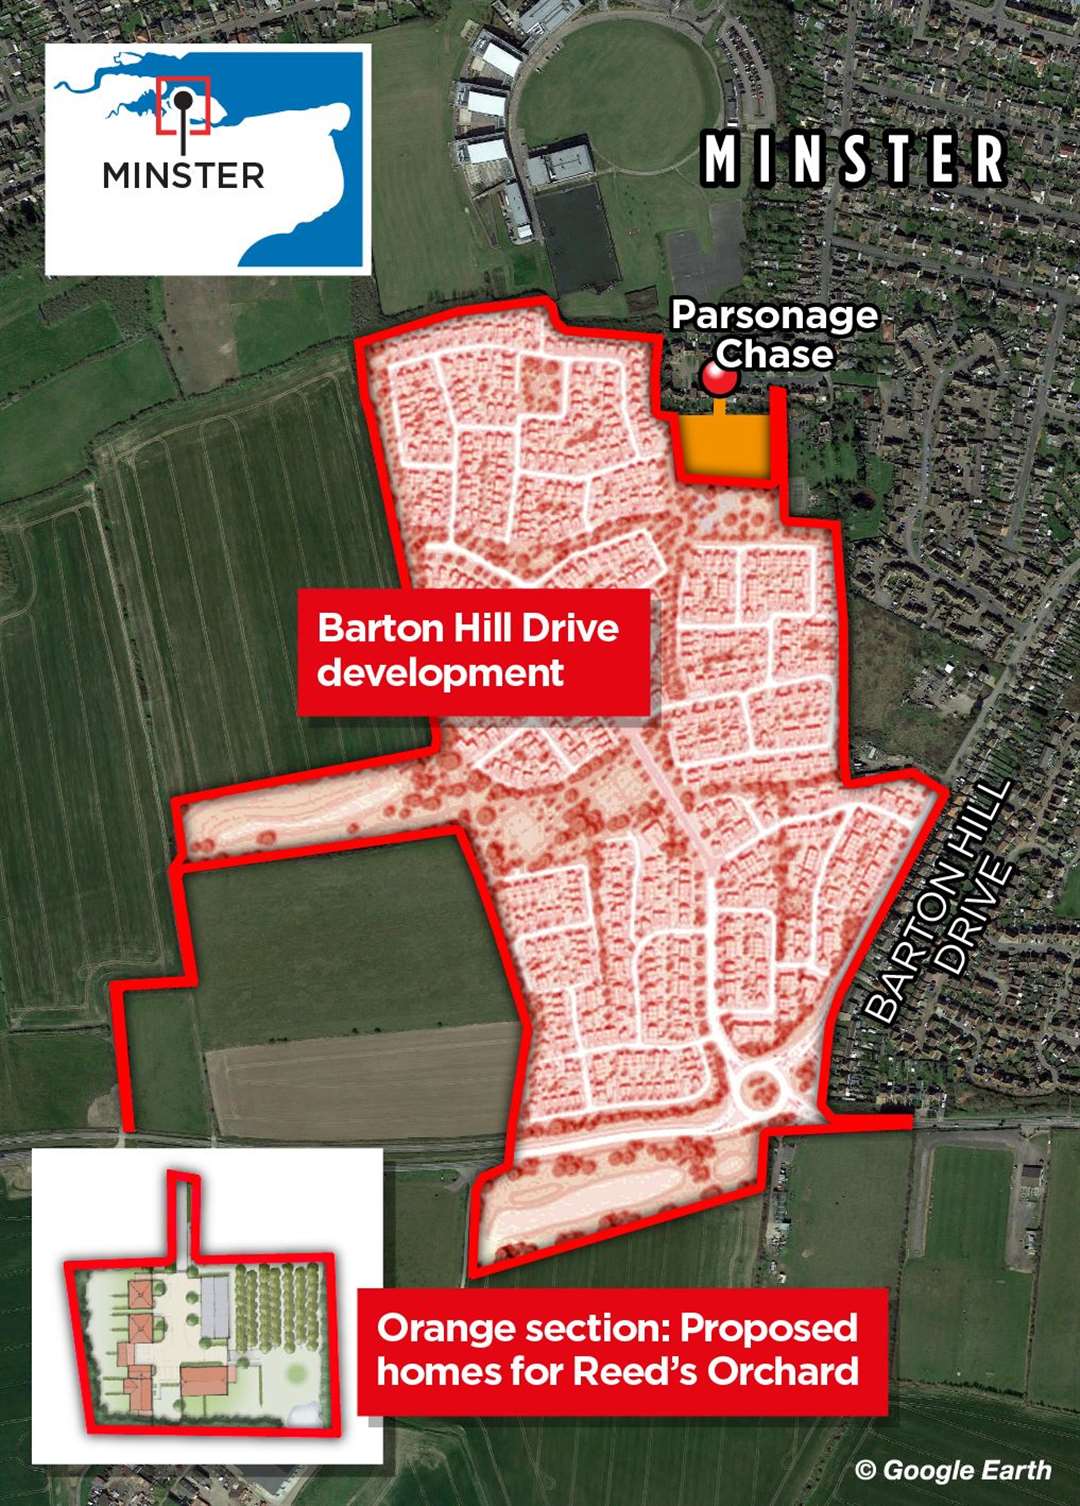 A map showing the orchard and where the 700 homes would go